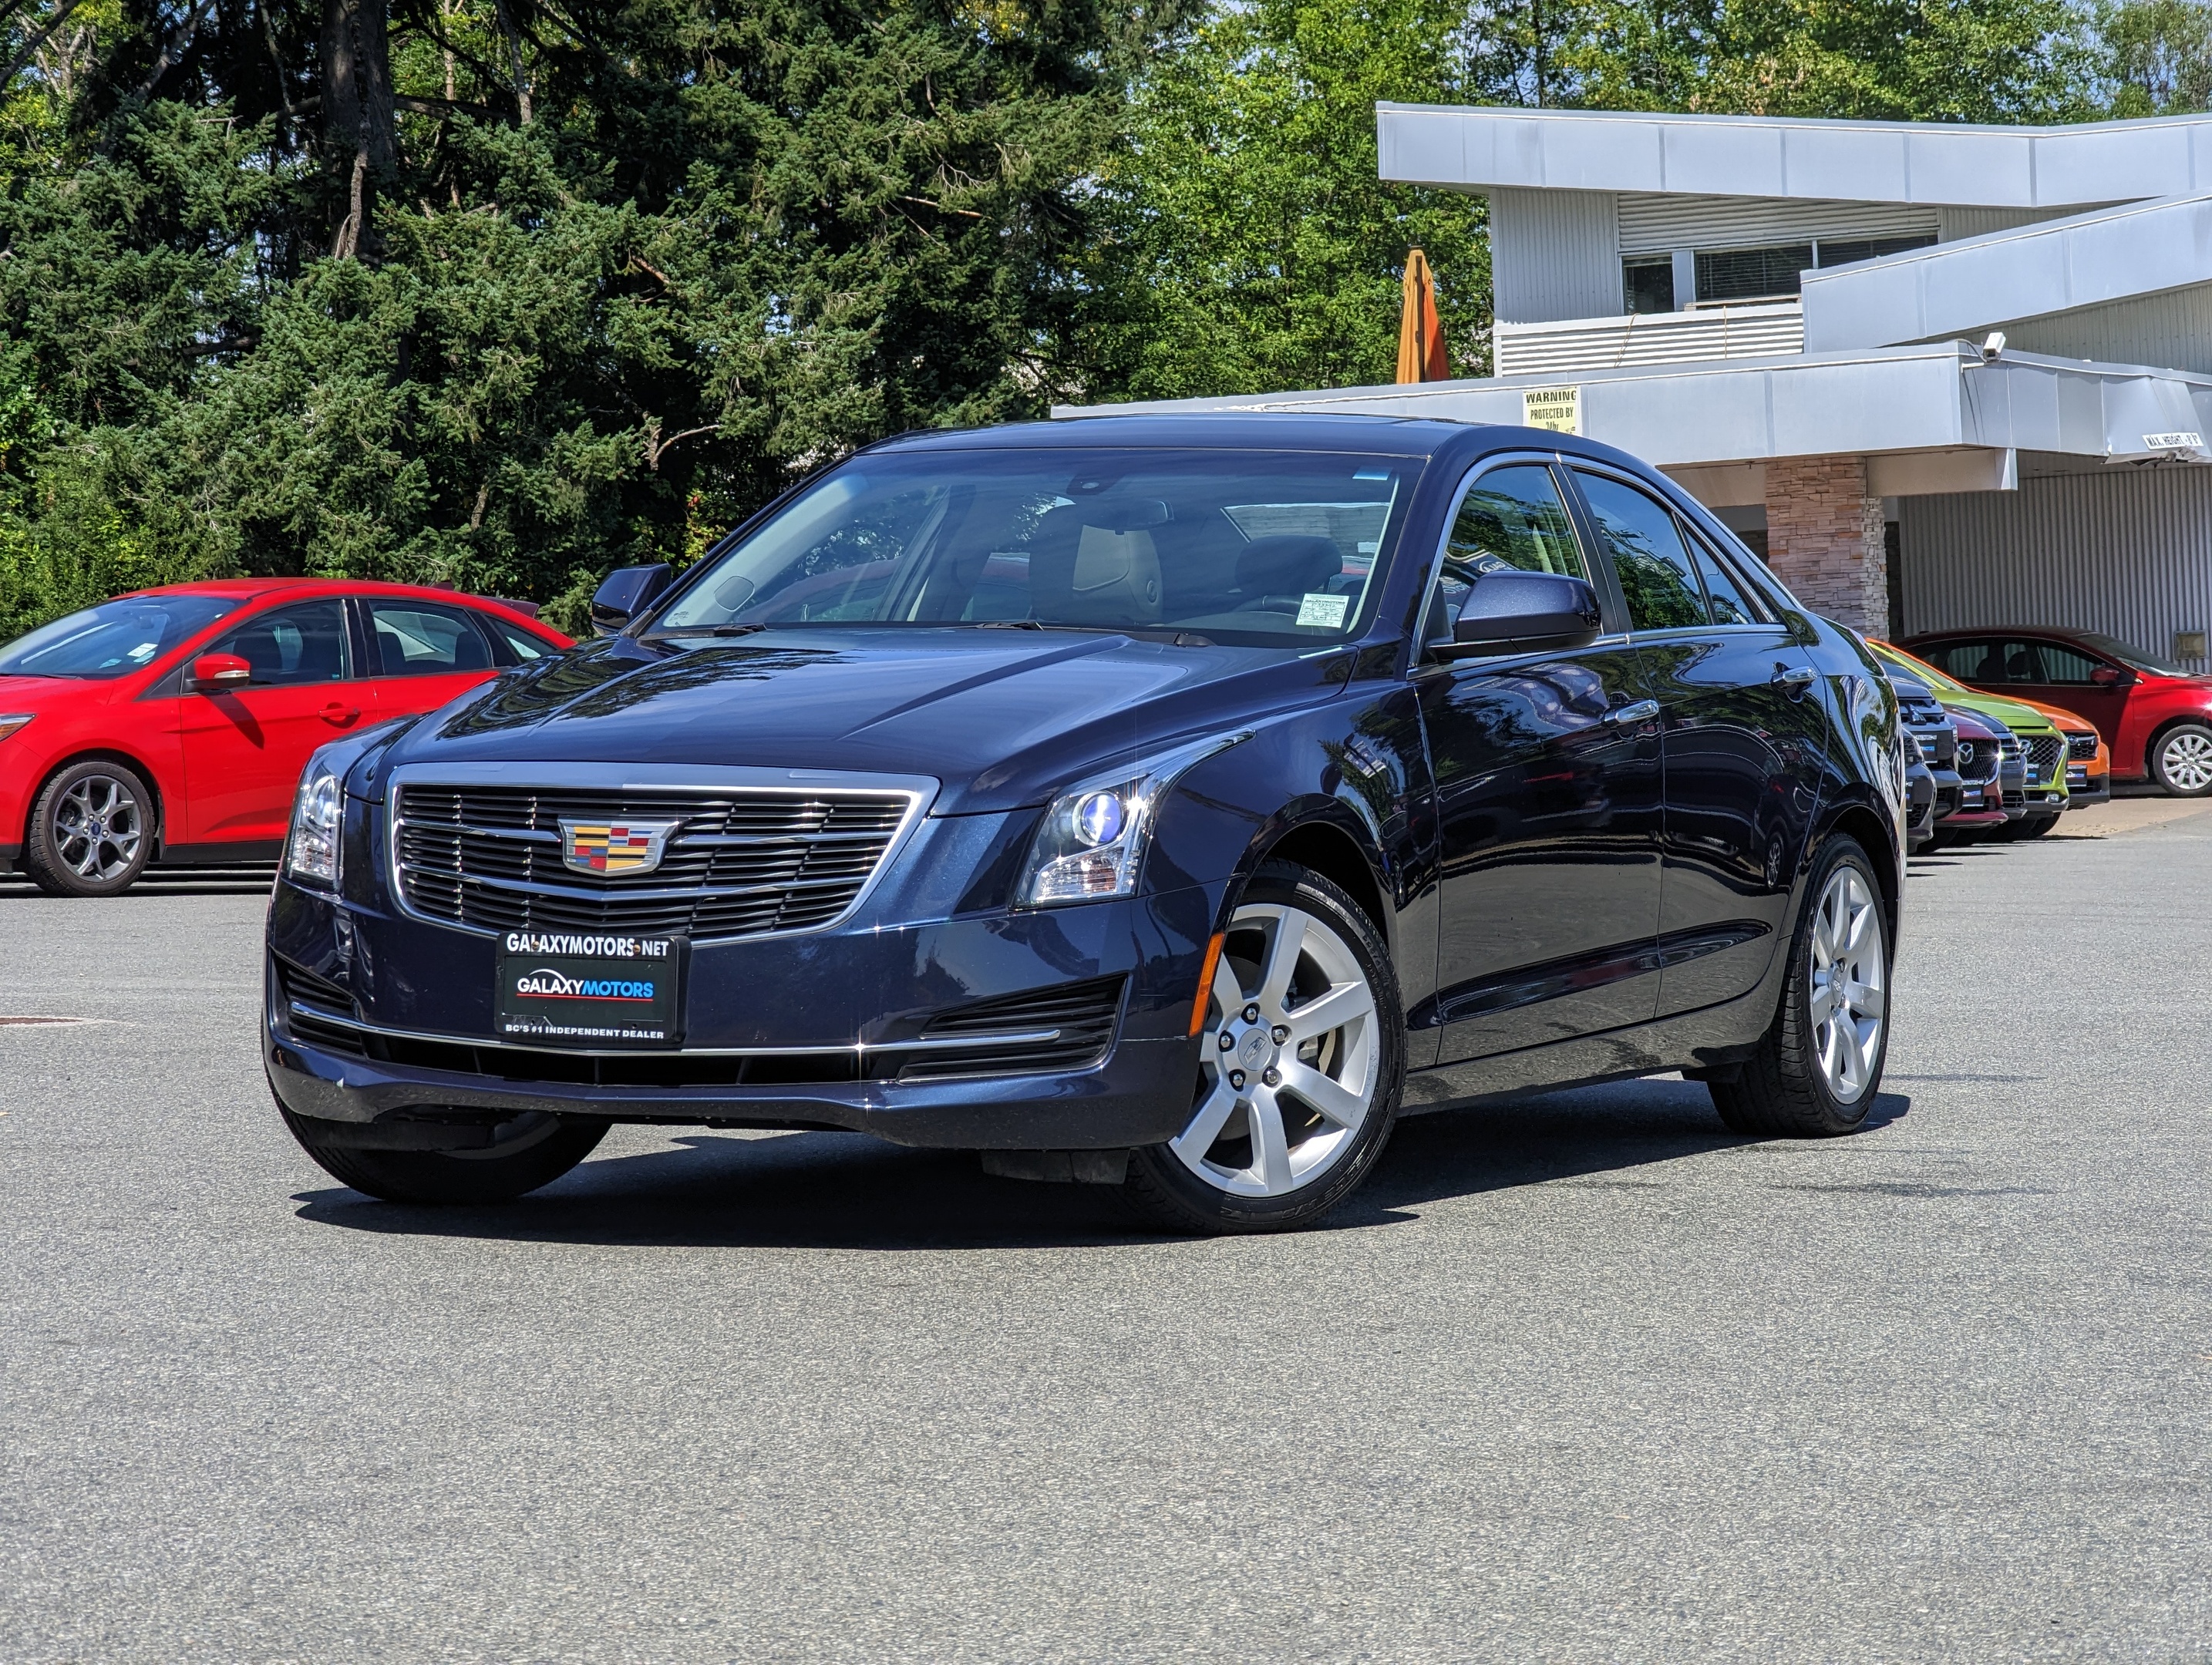 2016 Cadillac ATS RWD - BC Only, Sunroof, Leather, Heated Seats